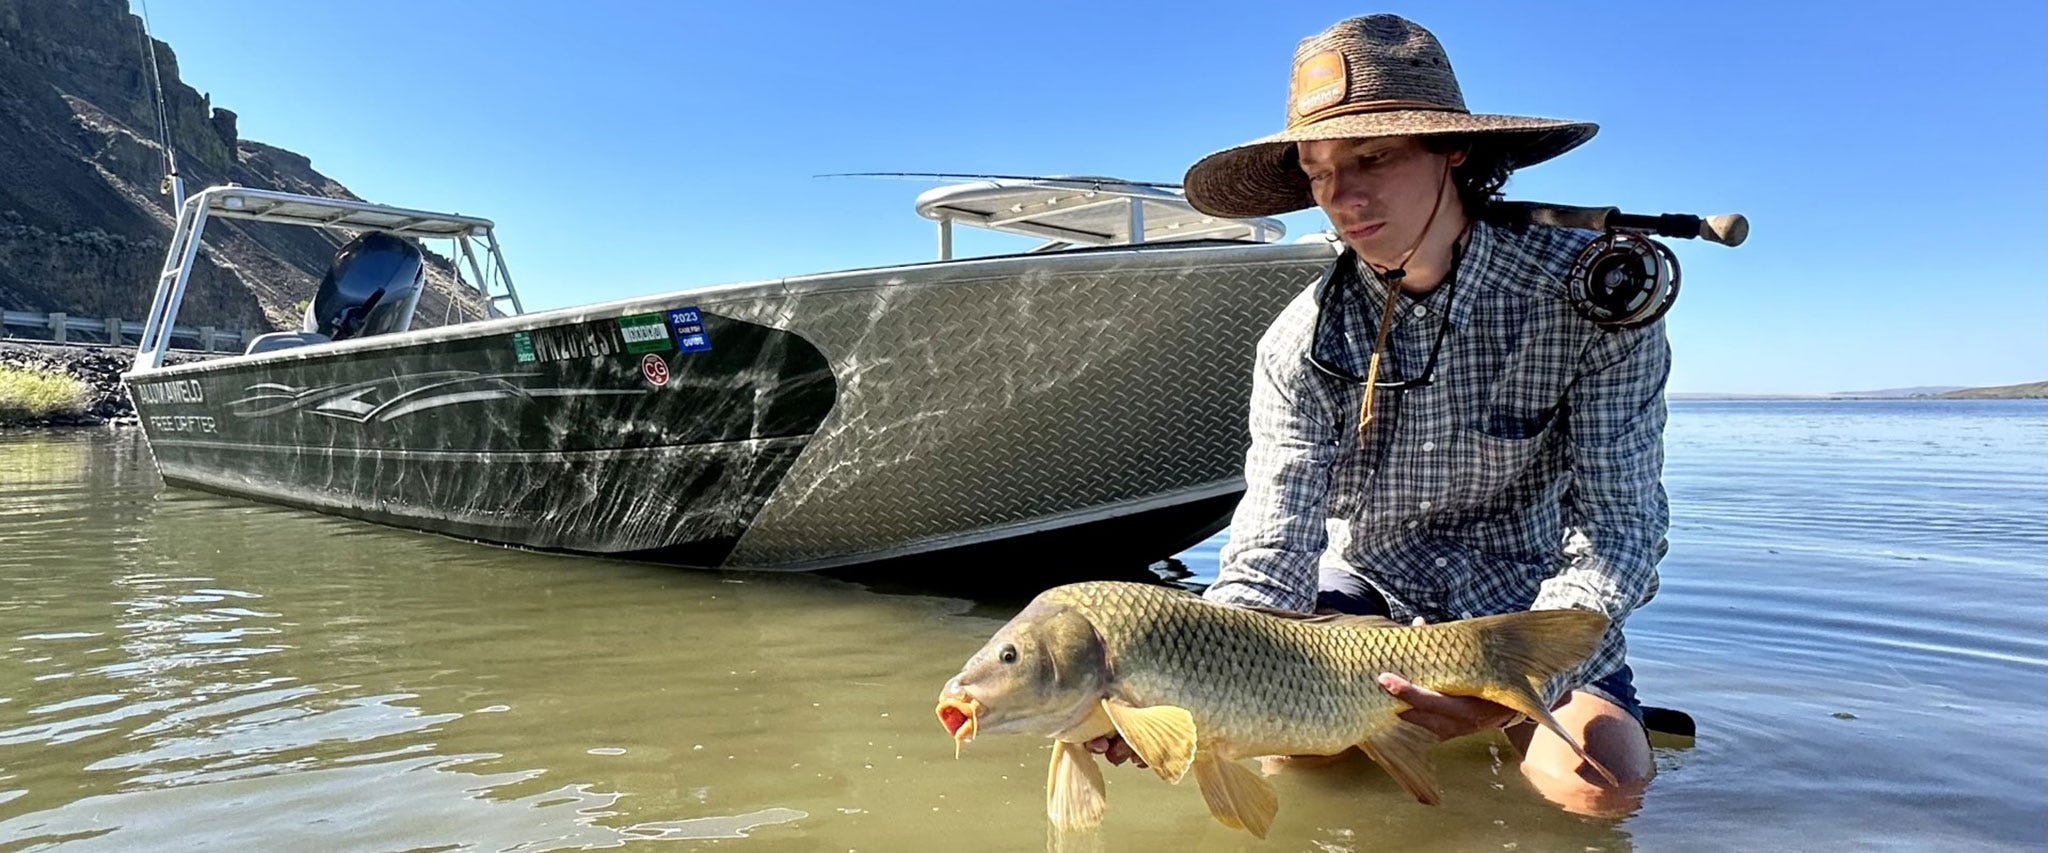 Urban Sombrero: The Pursuit of Muddy Holly- Fly Fishing for Carp